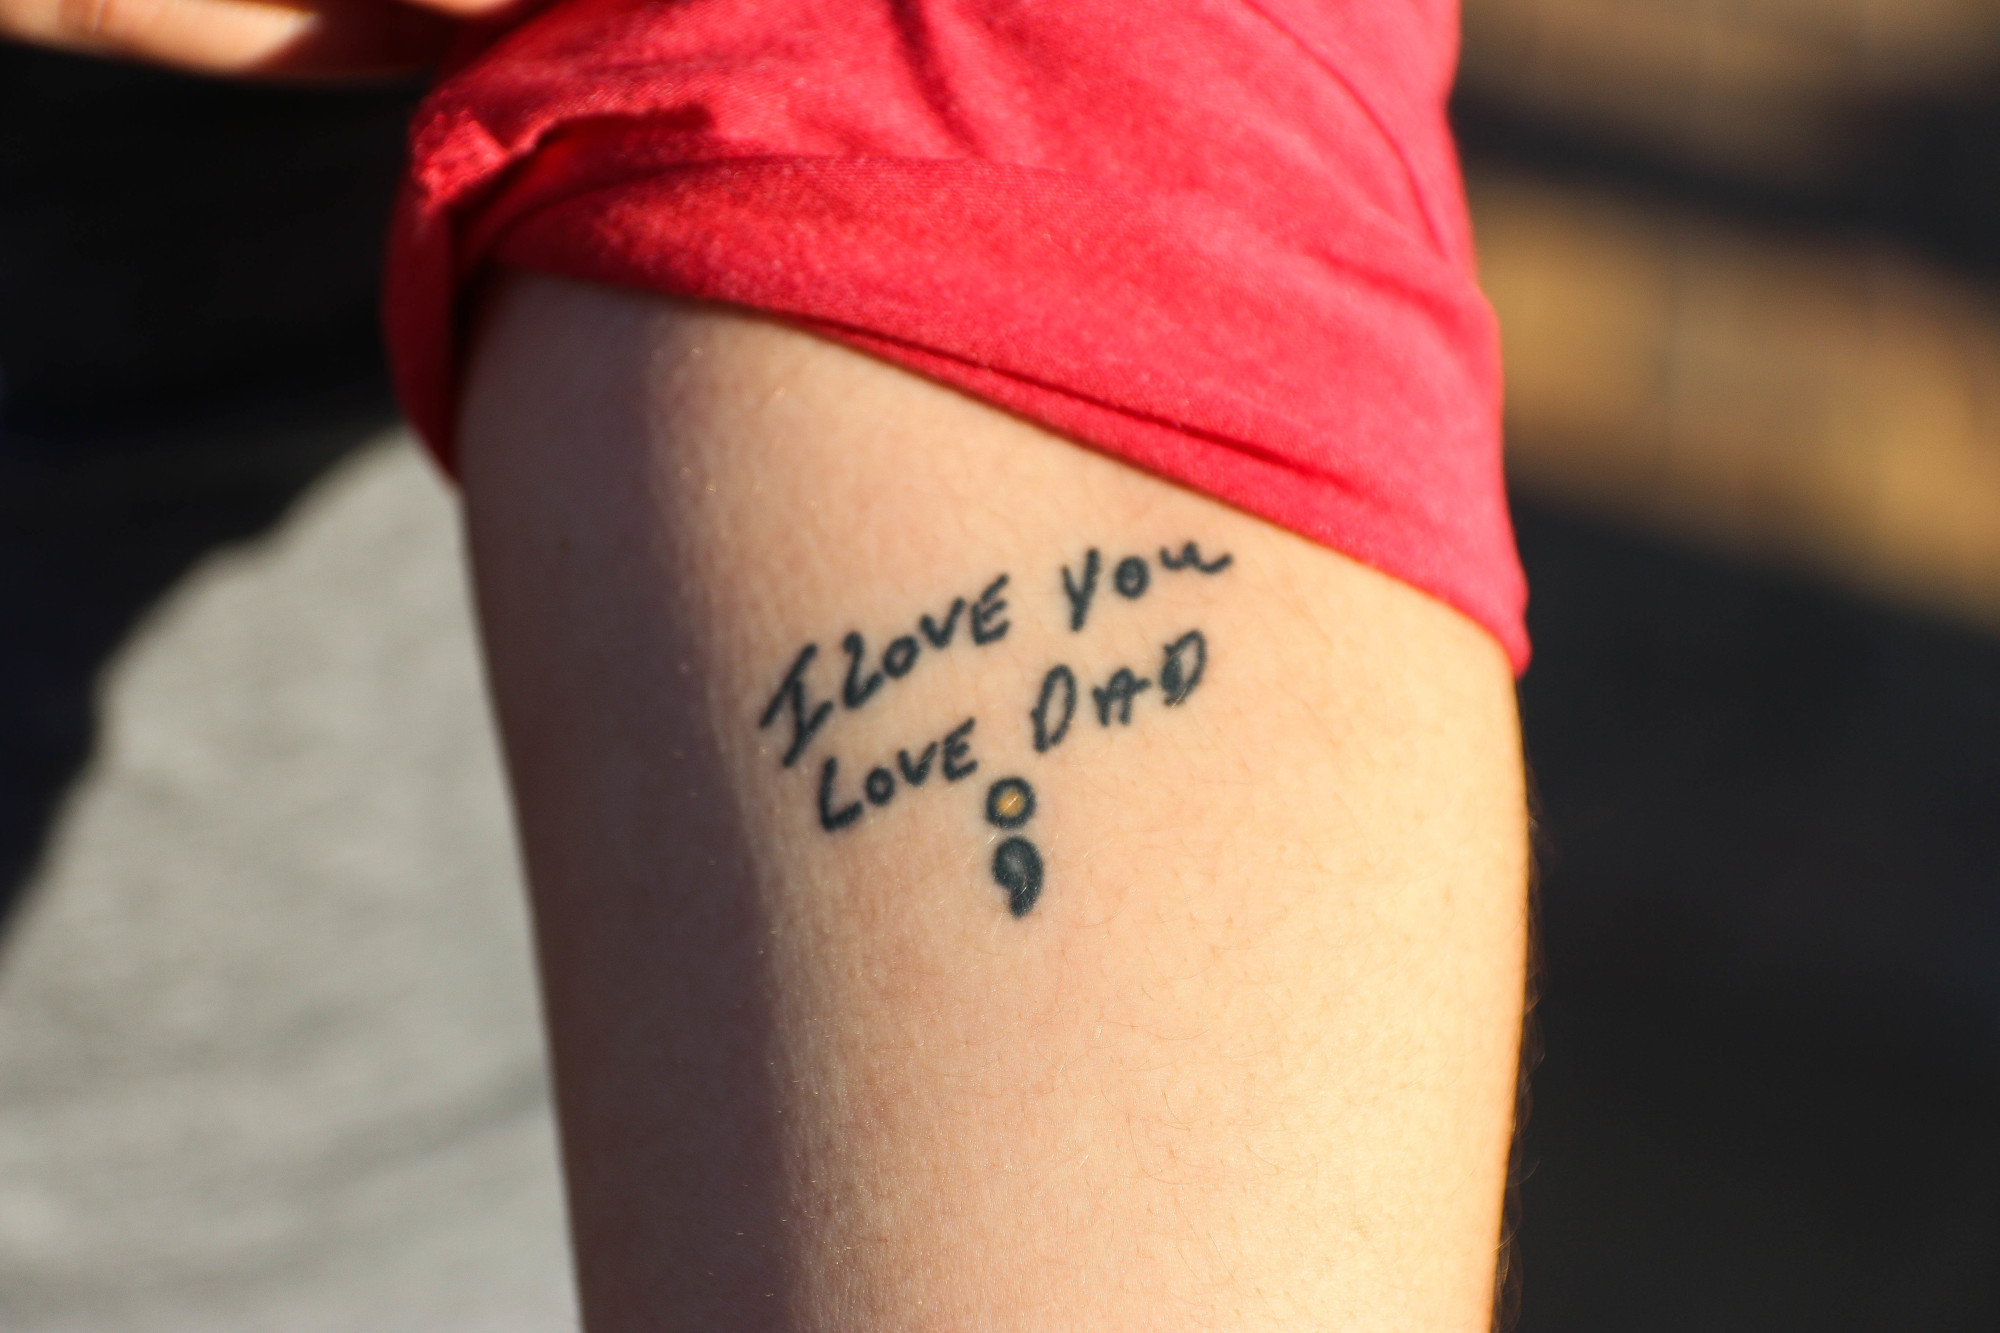 Melanie Cucco shows a tattoo she got in her father's handwriting to honor him after she lost him to suicide in 2008. Photo by Paige Wilson